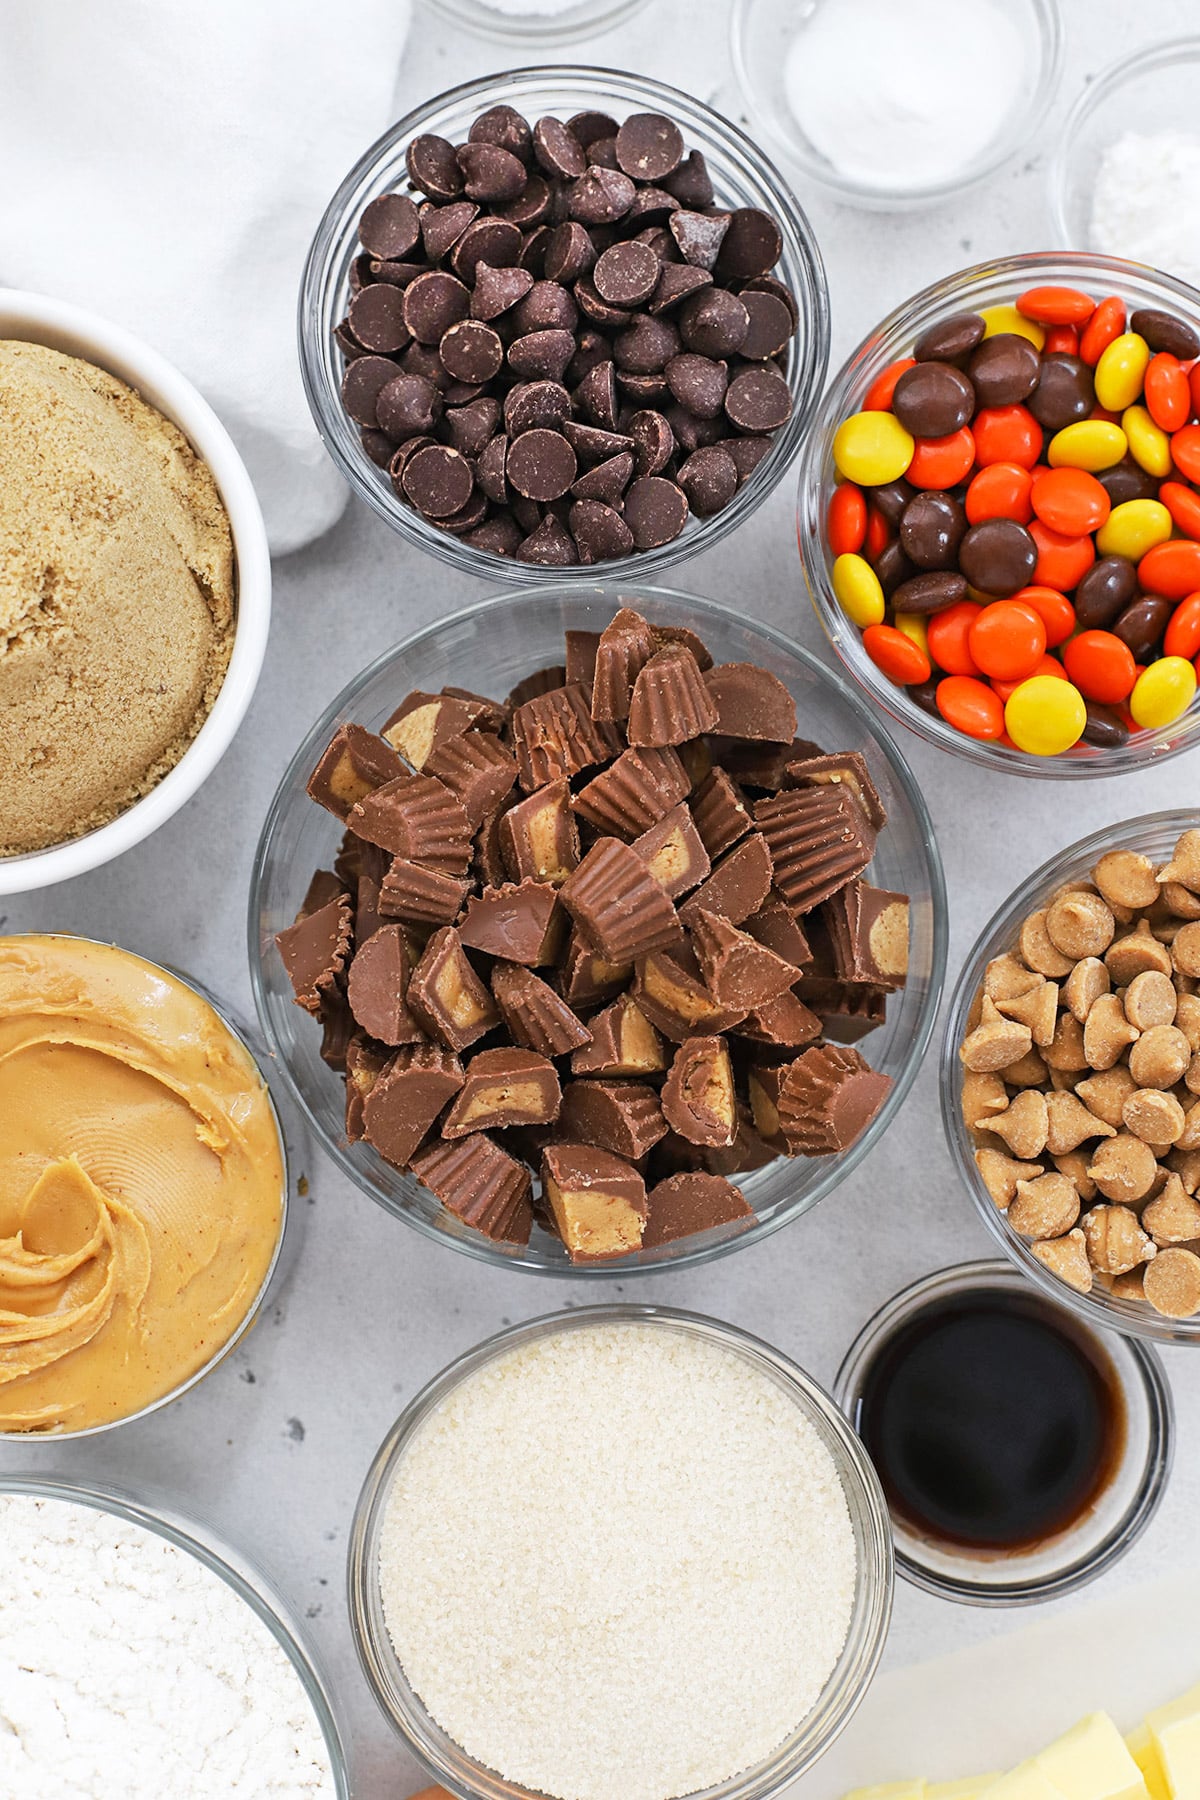 Overhead view of ingredients for gluten-free Reese's cookies